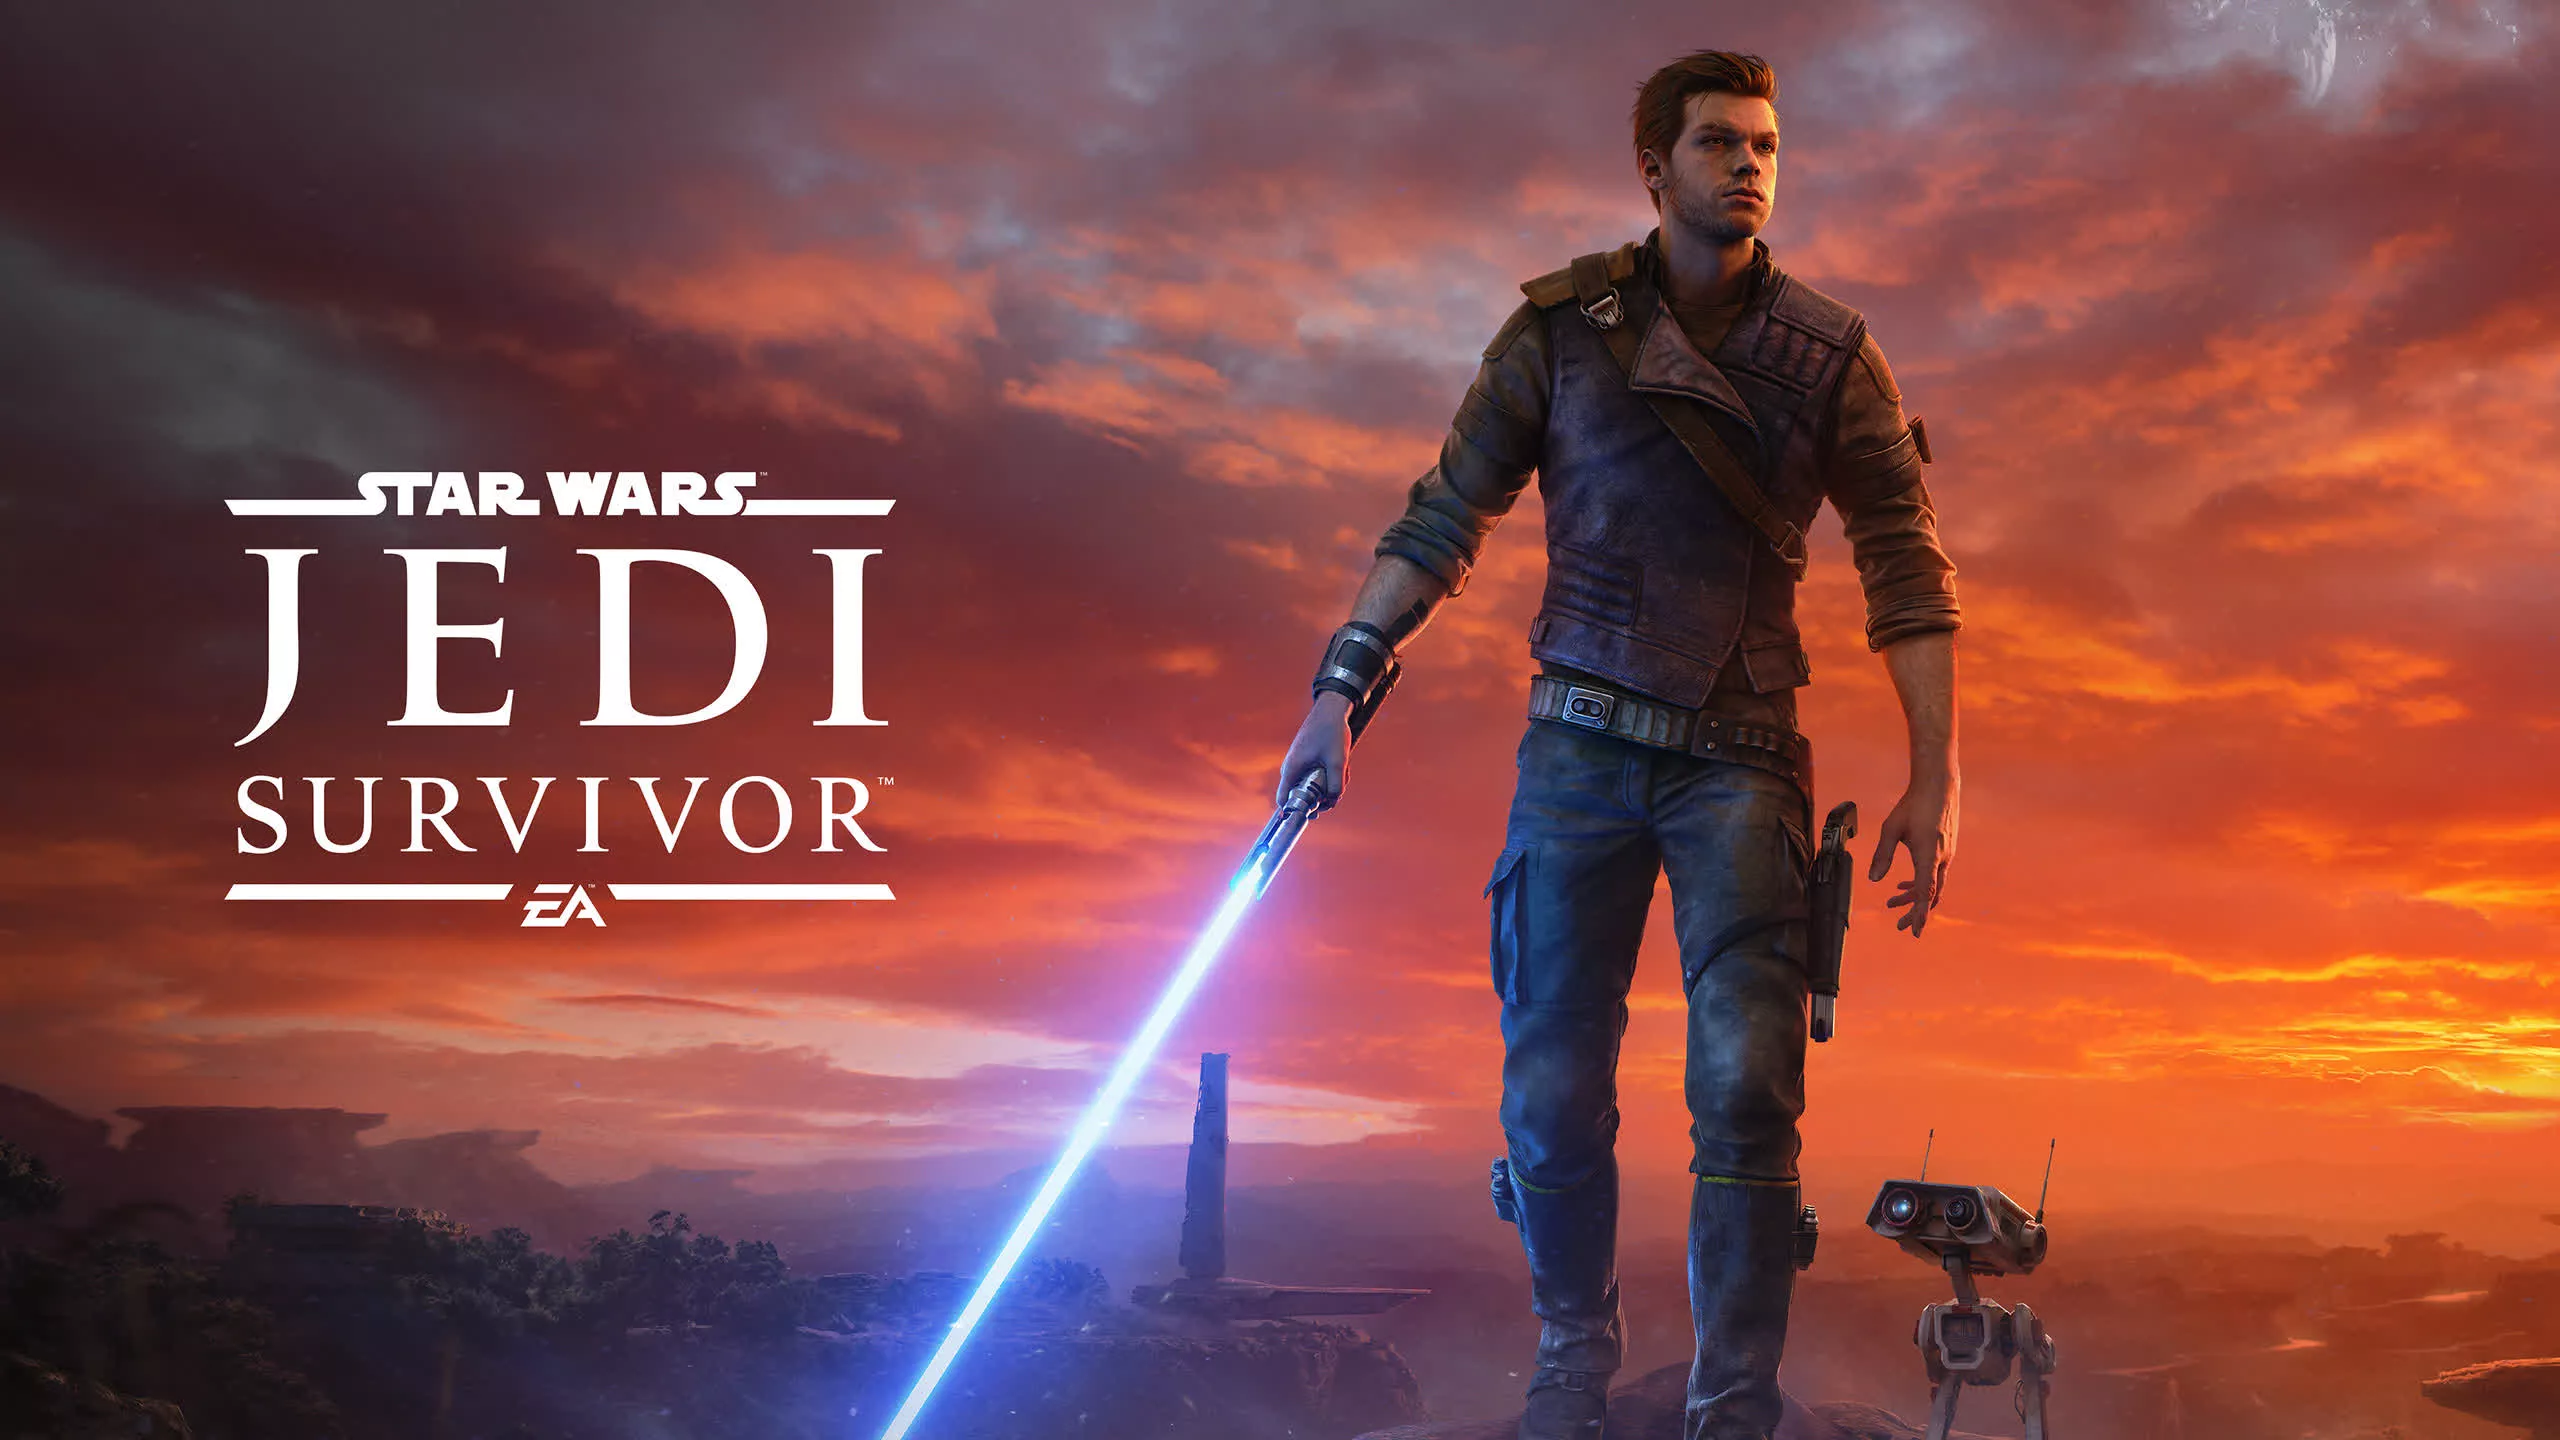 Star Wars Jedi: Survivor marred with technical issues on PC